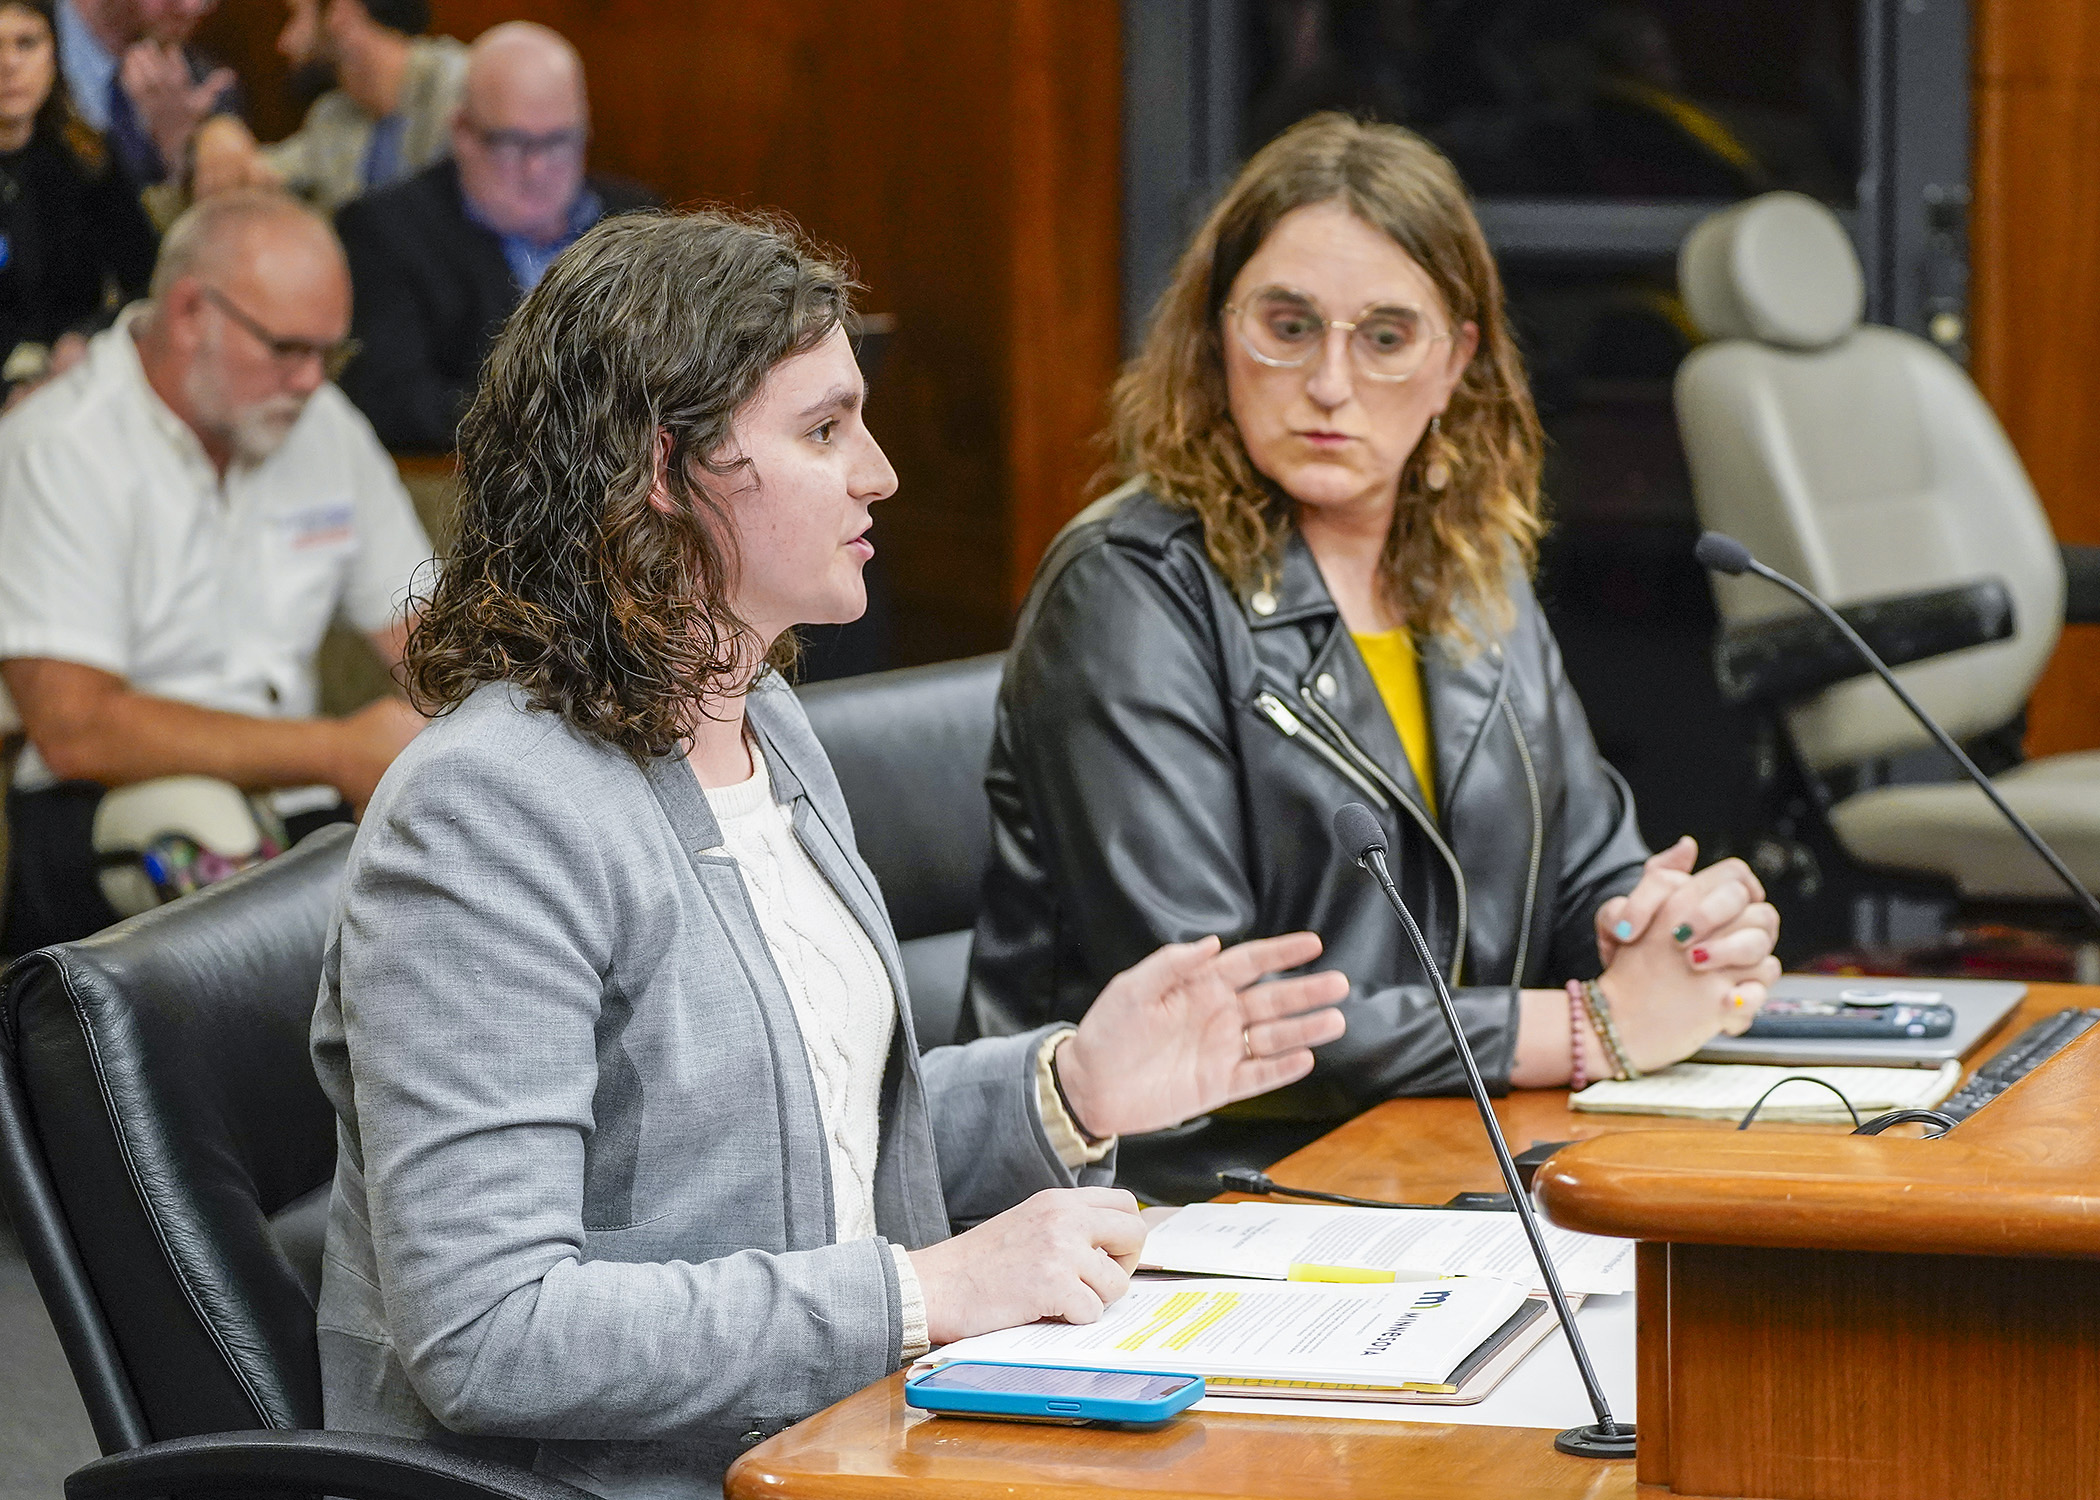 Ash Tifa, legal services program coordinator at Rainbow Health, testifies in support of a bill sponsored by Rep. Leigh Finke, right, that would require health plan coverage of gender-affirming care. (Photo by Andrew VonBank) 